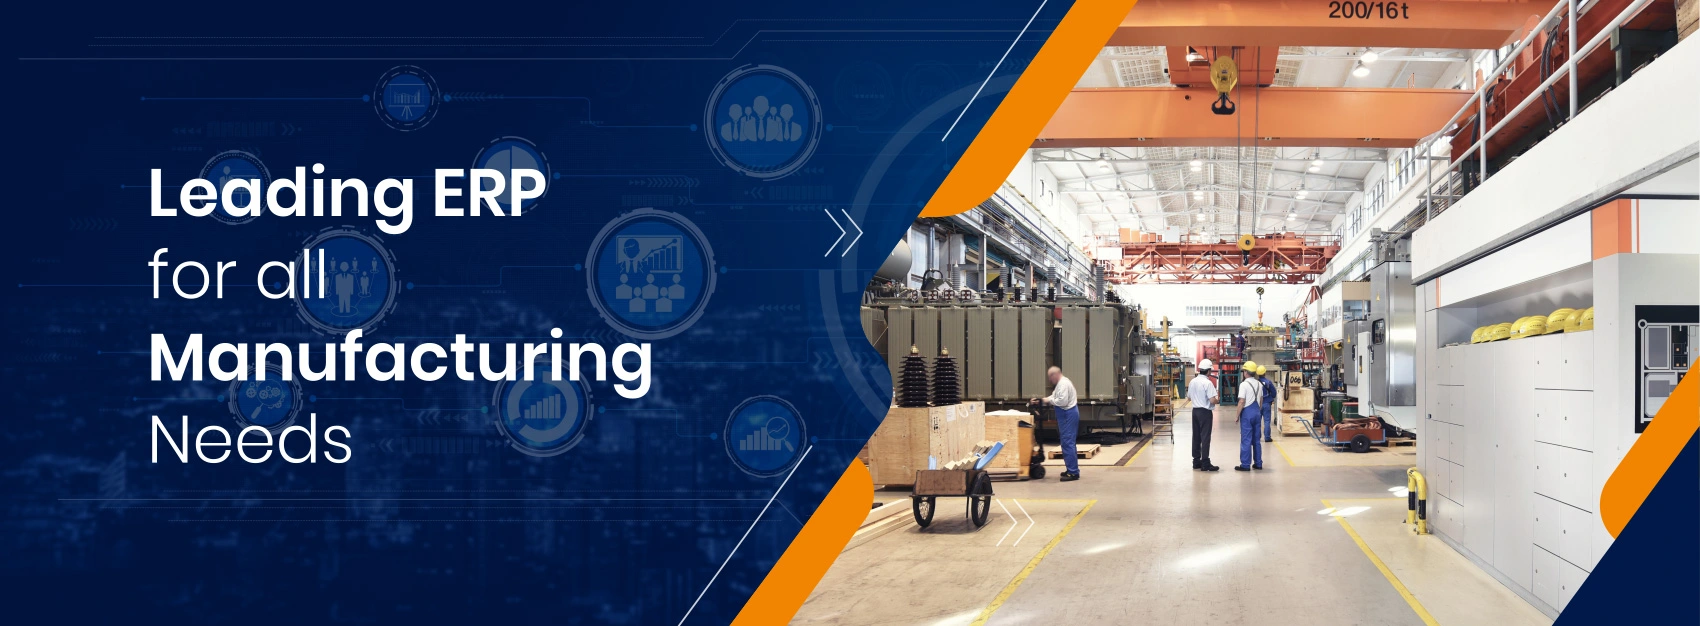 Leading ERP for all Manufacturing Needs